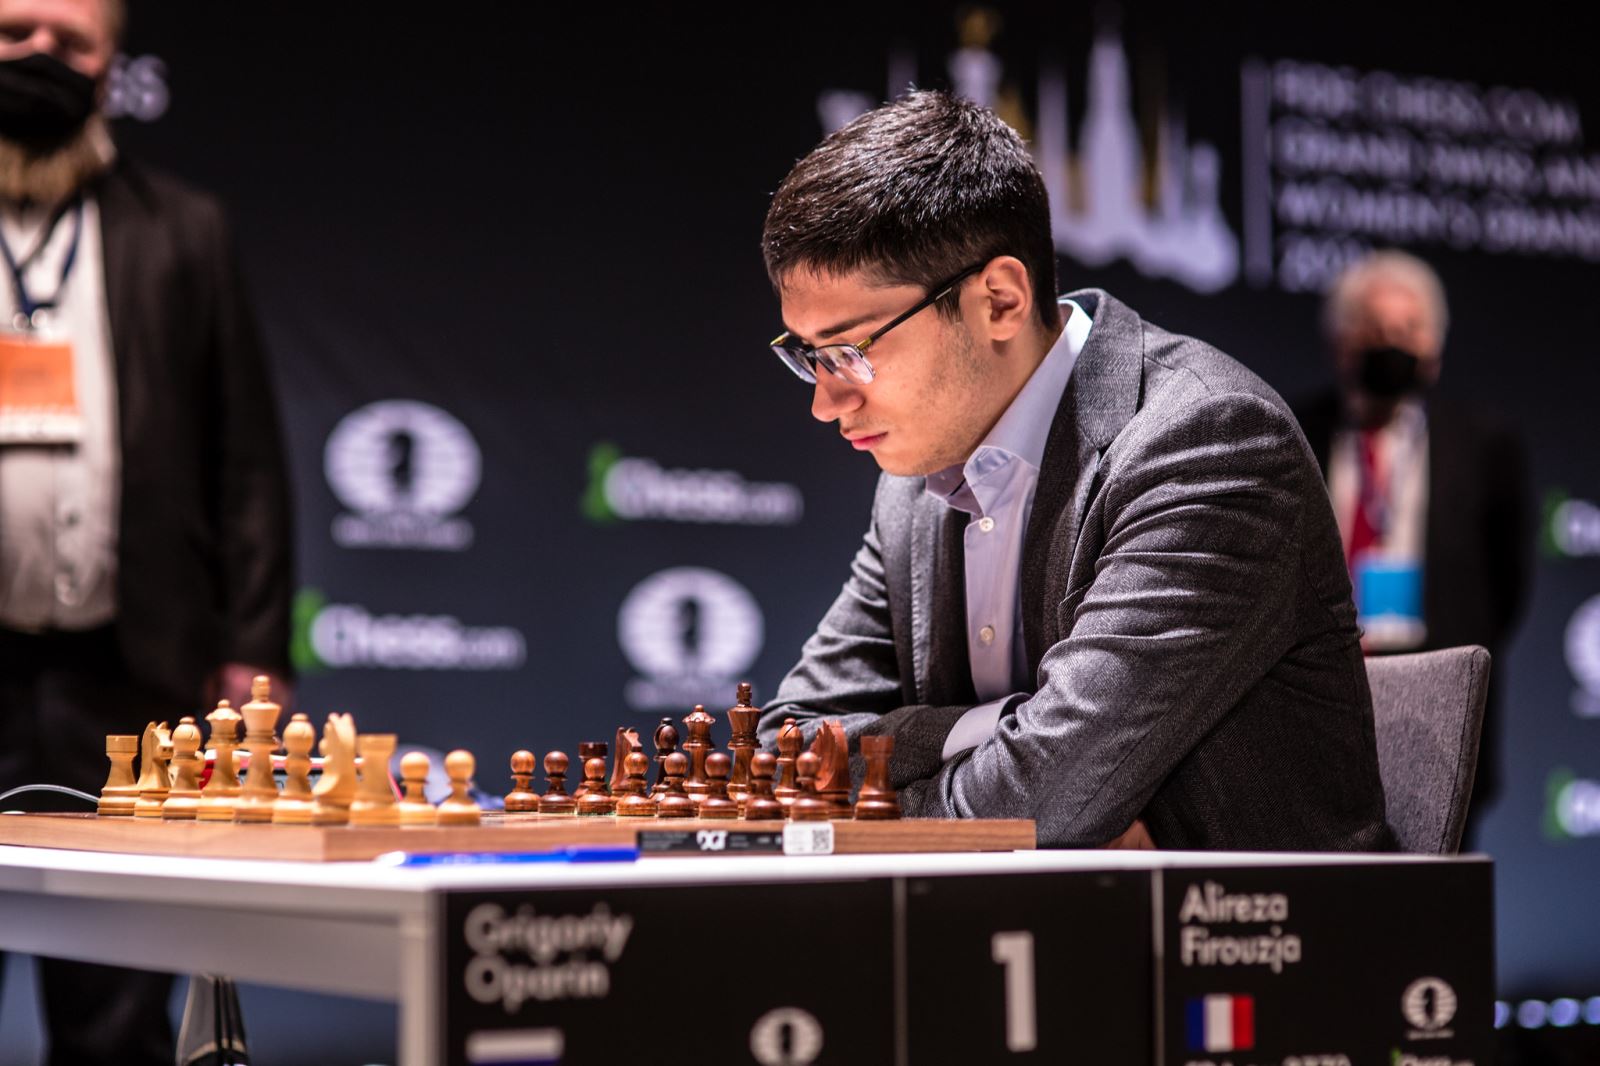 FIDE Grand Swiss brings grand expectations